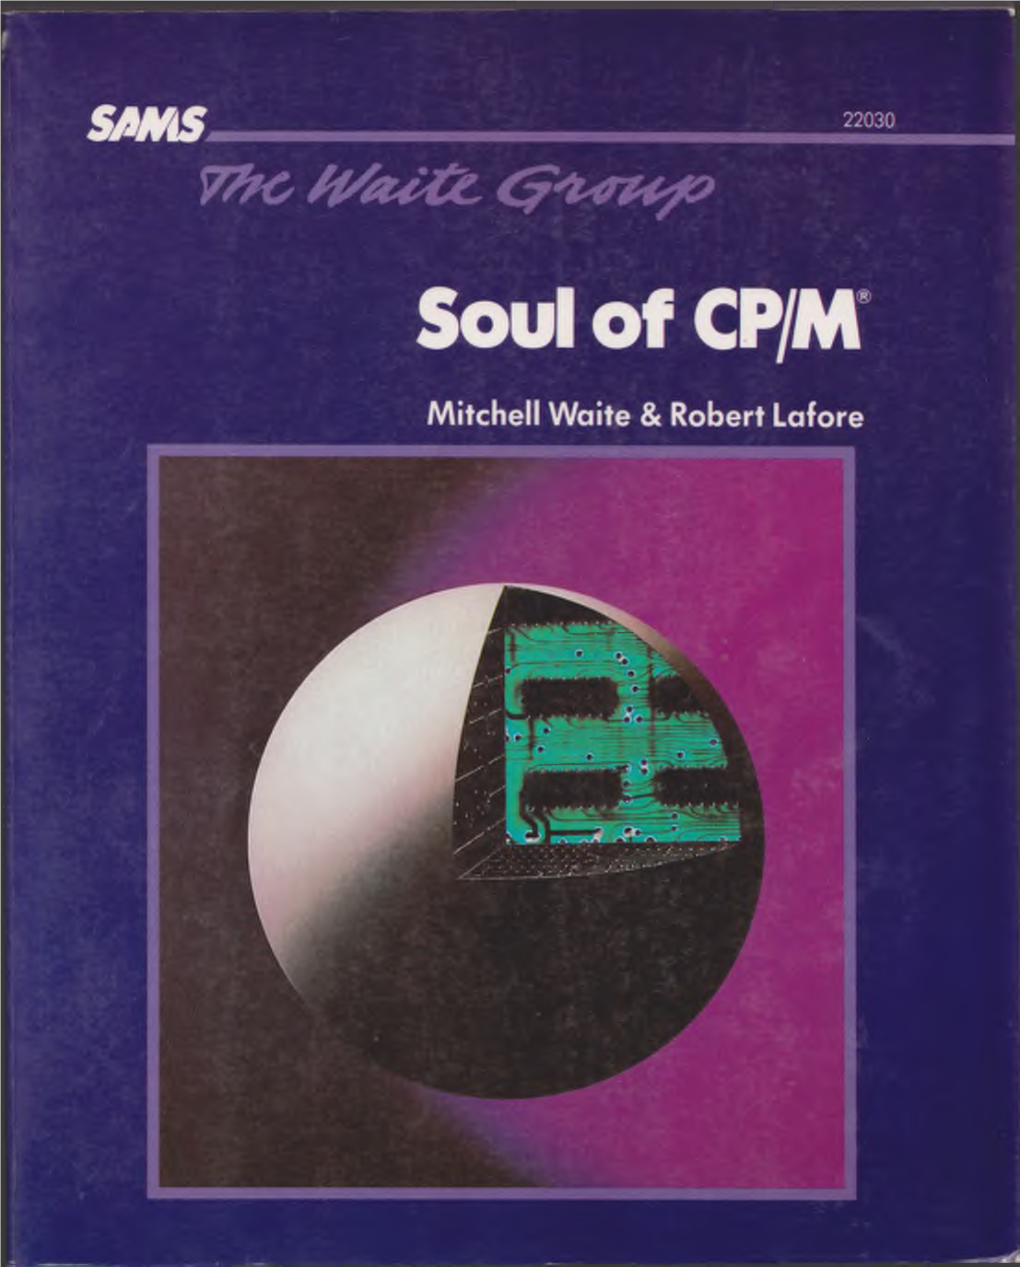 “Soul” of CP/M: the Universal System Calls That Make CP/M the World’S Most Popular Microcomputer Operating System